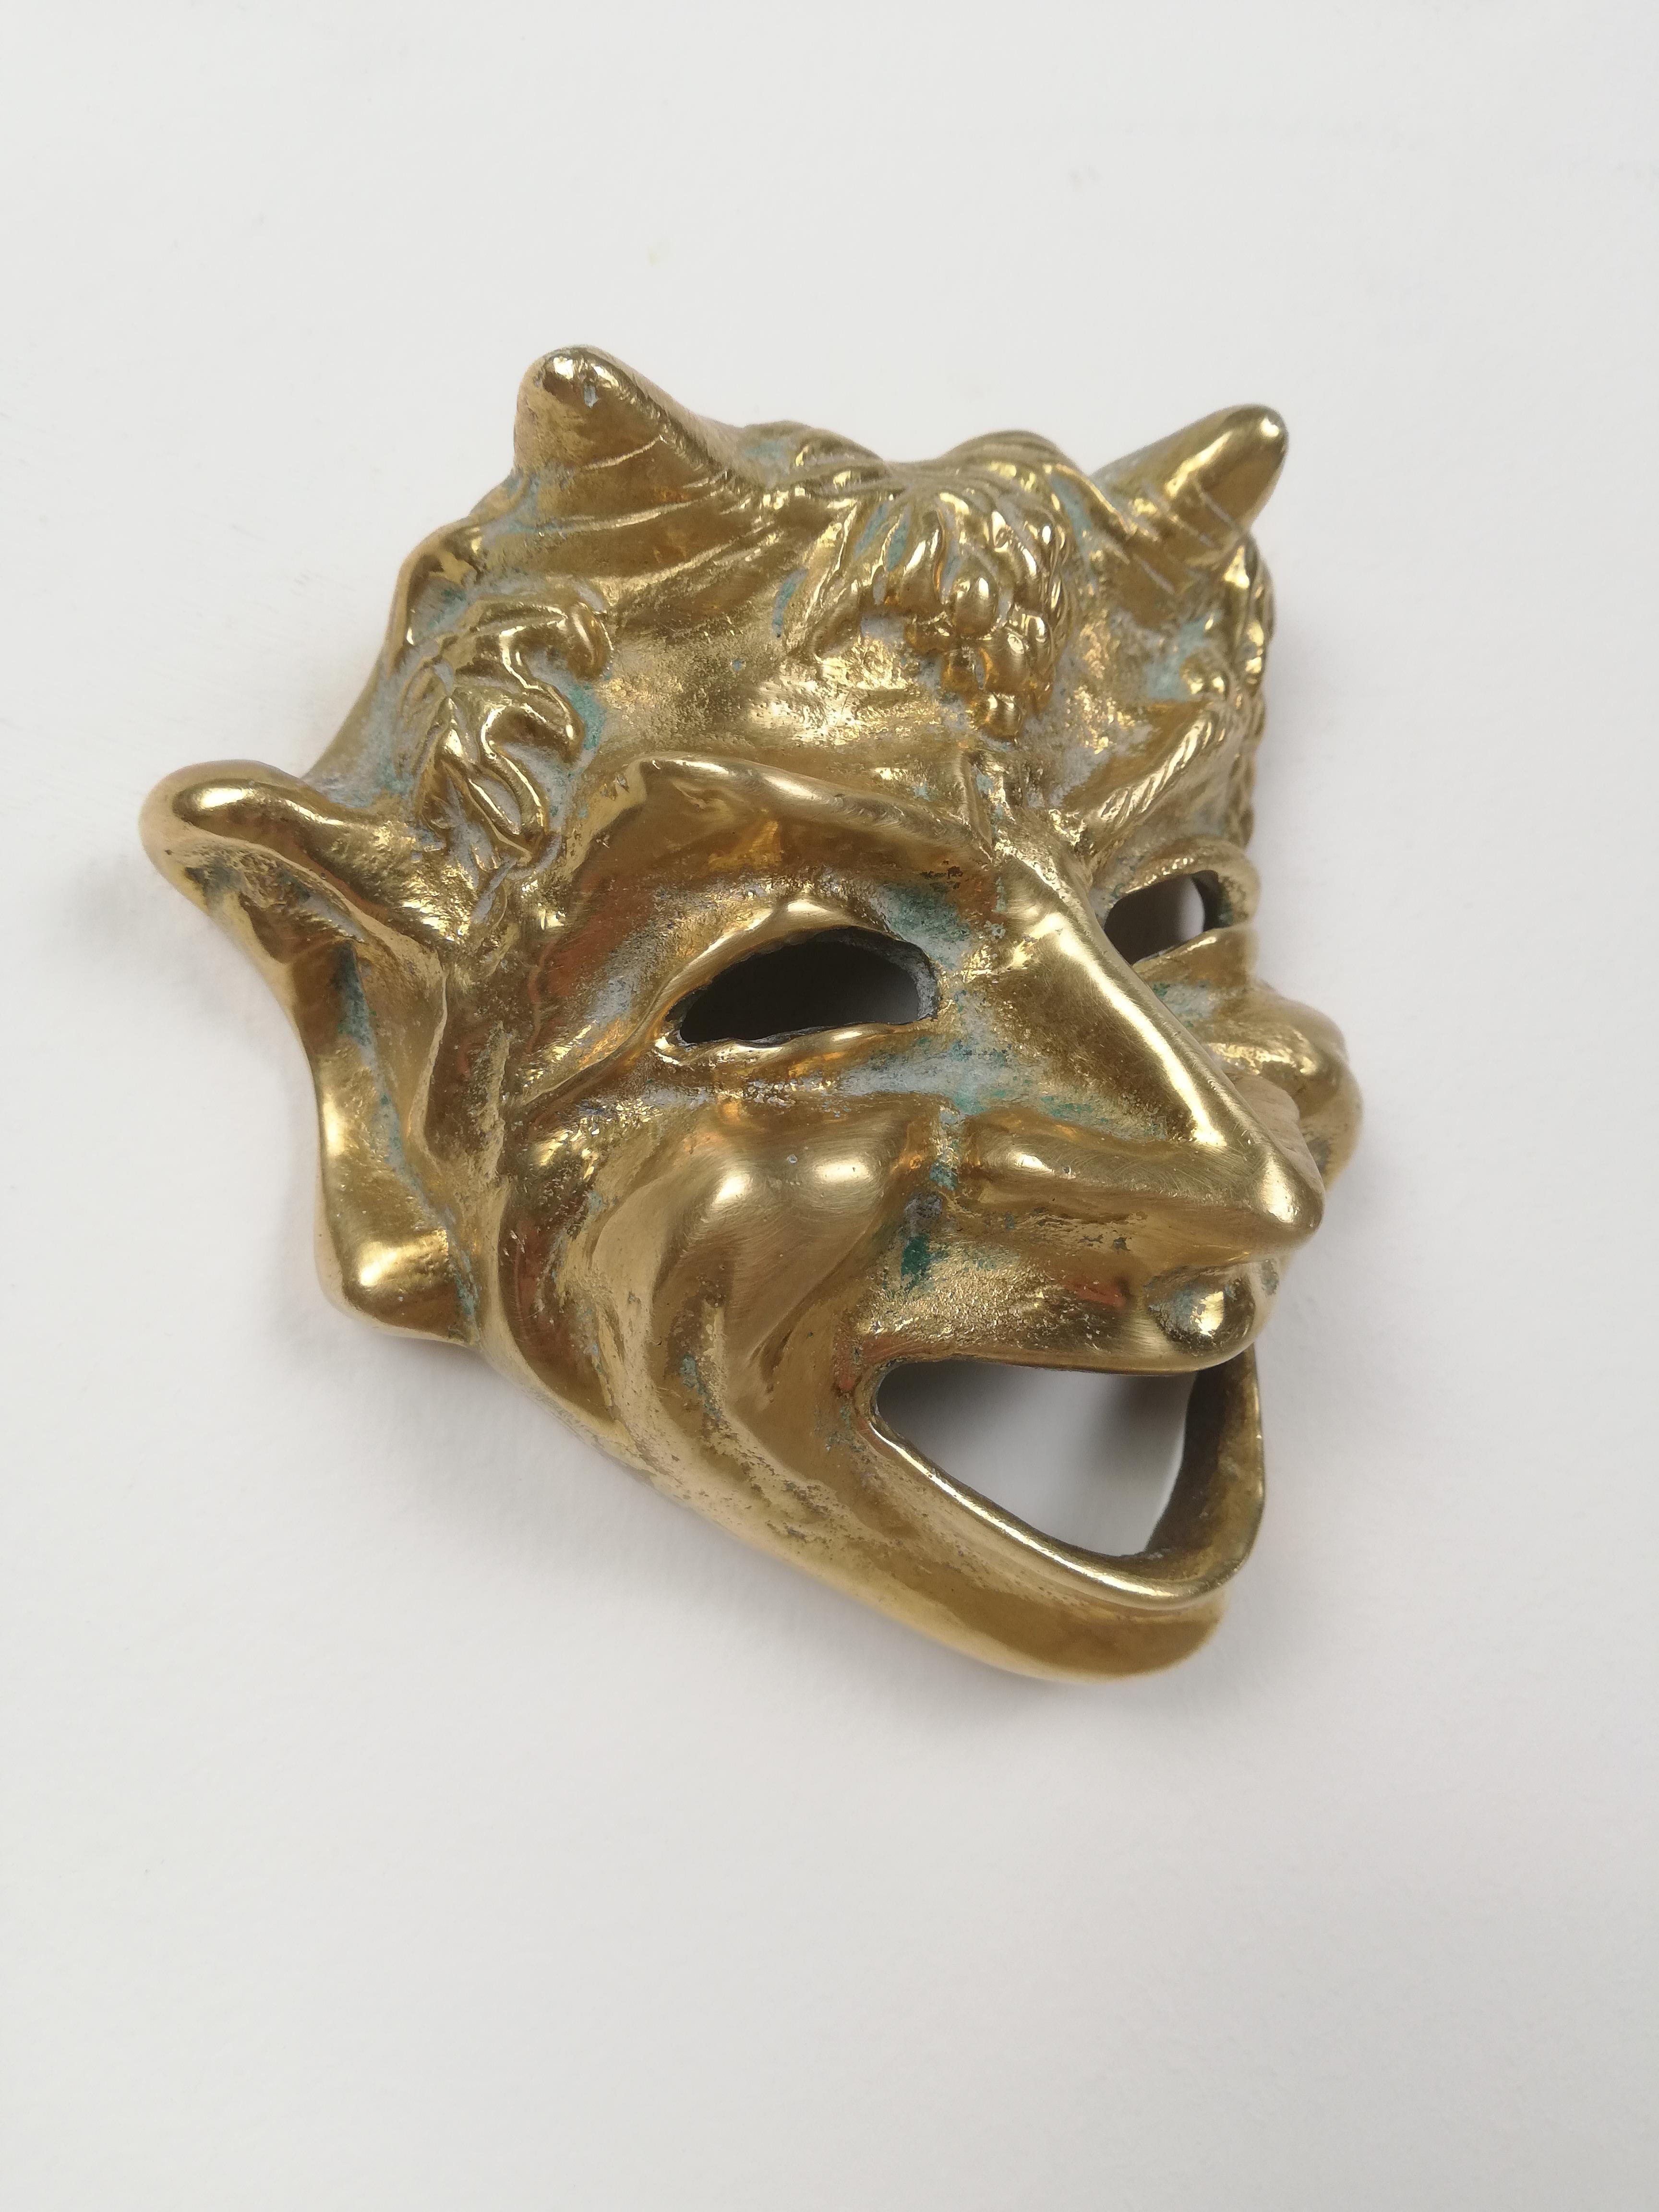 A couple of vintage masks inspired by the Greek Roman theater.
They were made in solid brass and represent respectively the 2 most important theatrical genres: comedy and tragedy.
Comedy is represented by a laughing satyr while tragedy, by a